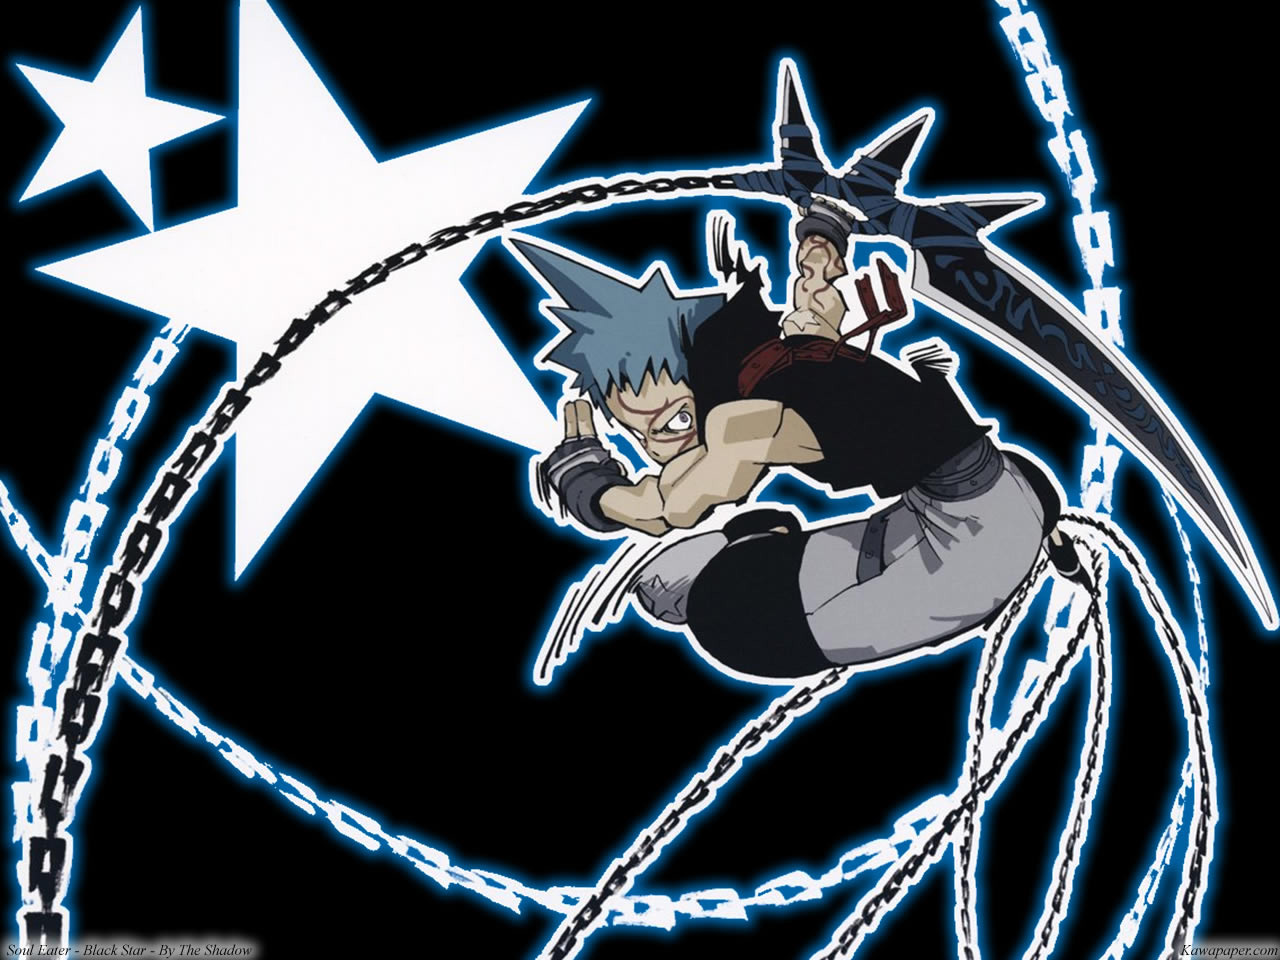 Free Download Black Star Chains And Stars Wallpaper Soul Eater Anime [1280x960] For Your Desktop